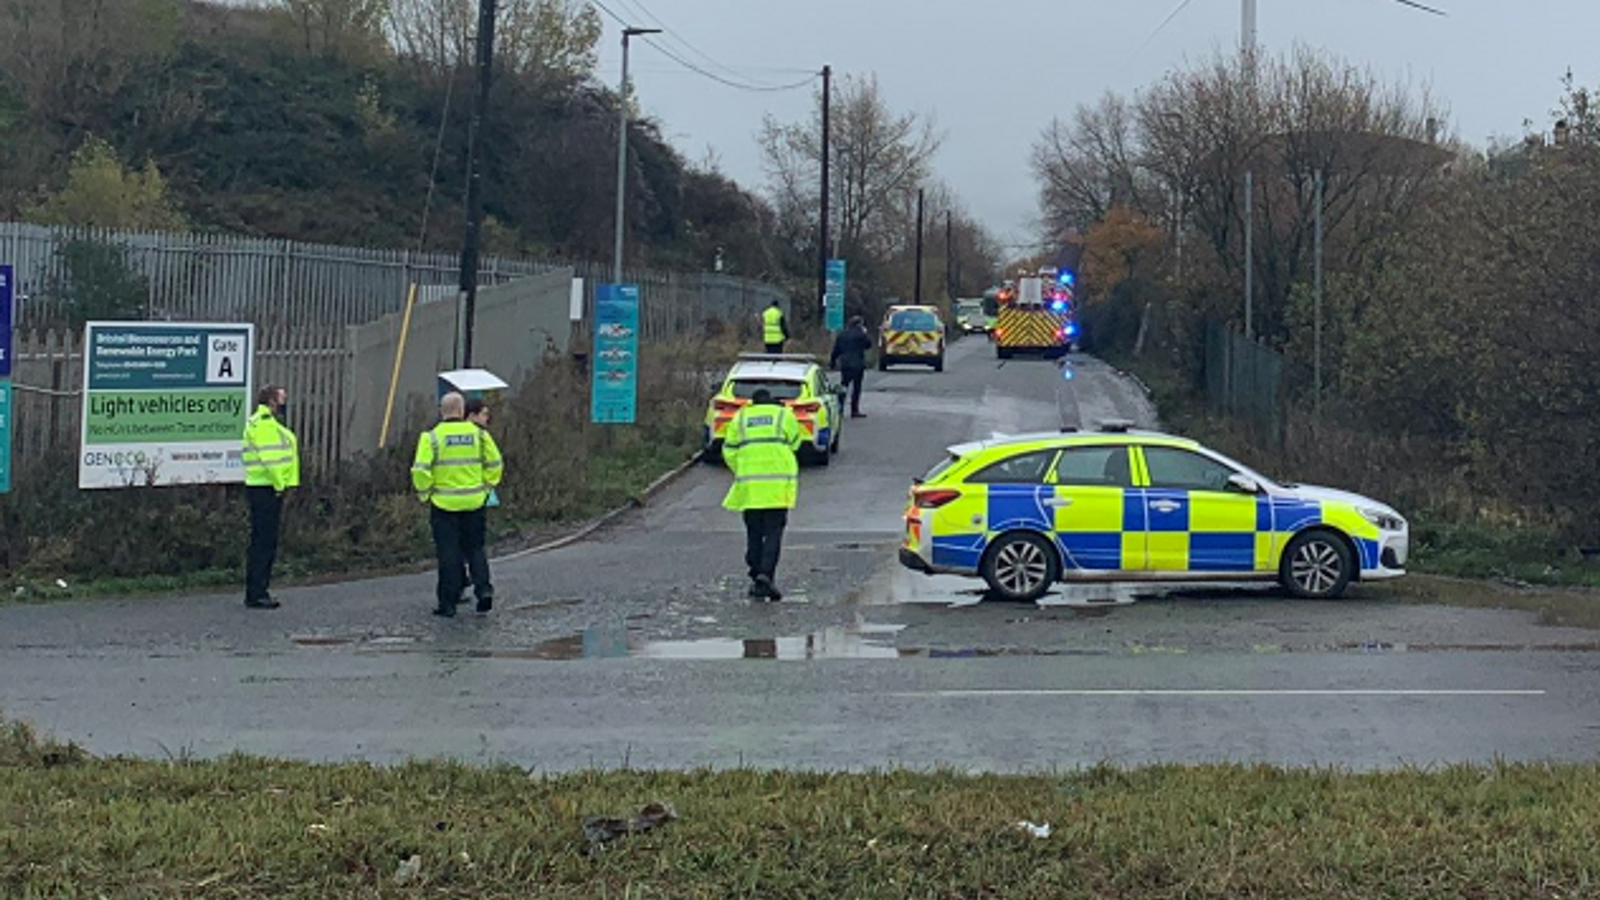 NEWS | Four people killed in large explosion at Avonmouth near Bristol